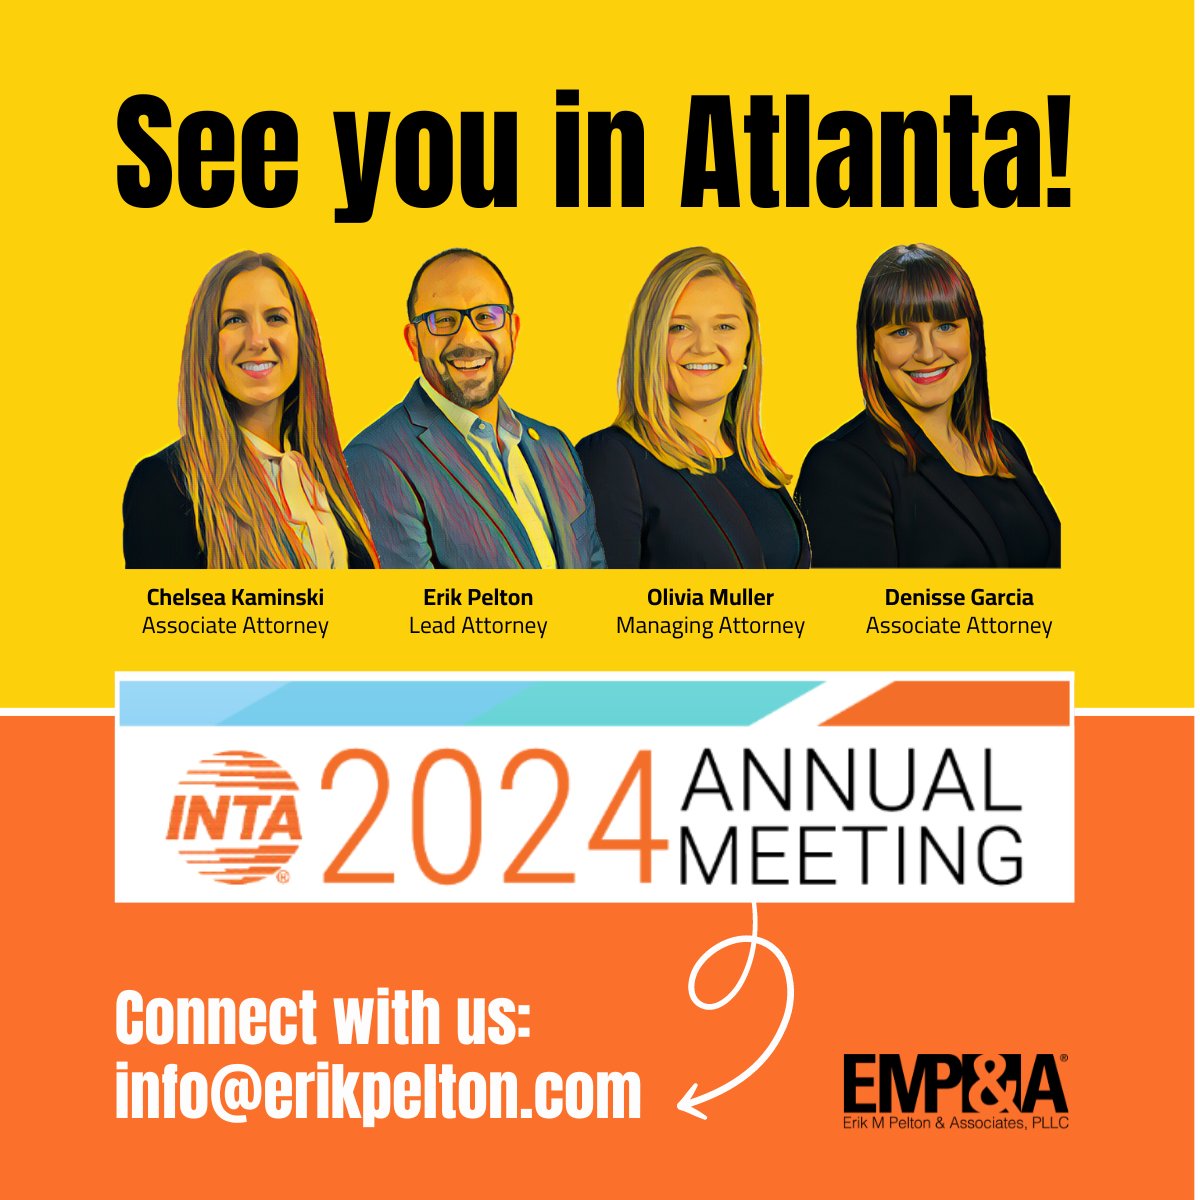 #inta2024 is just around the corner - contact us at info@erikpelton.com to schedule a meeting or connect with us at the conference. See you there! #brandidentity #trademarklawyer #brandprotection #marketing #trademark #branding #smallbusiness #advertising #iplaw #trademarklaw